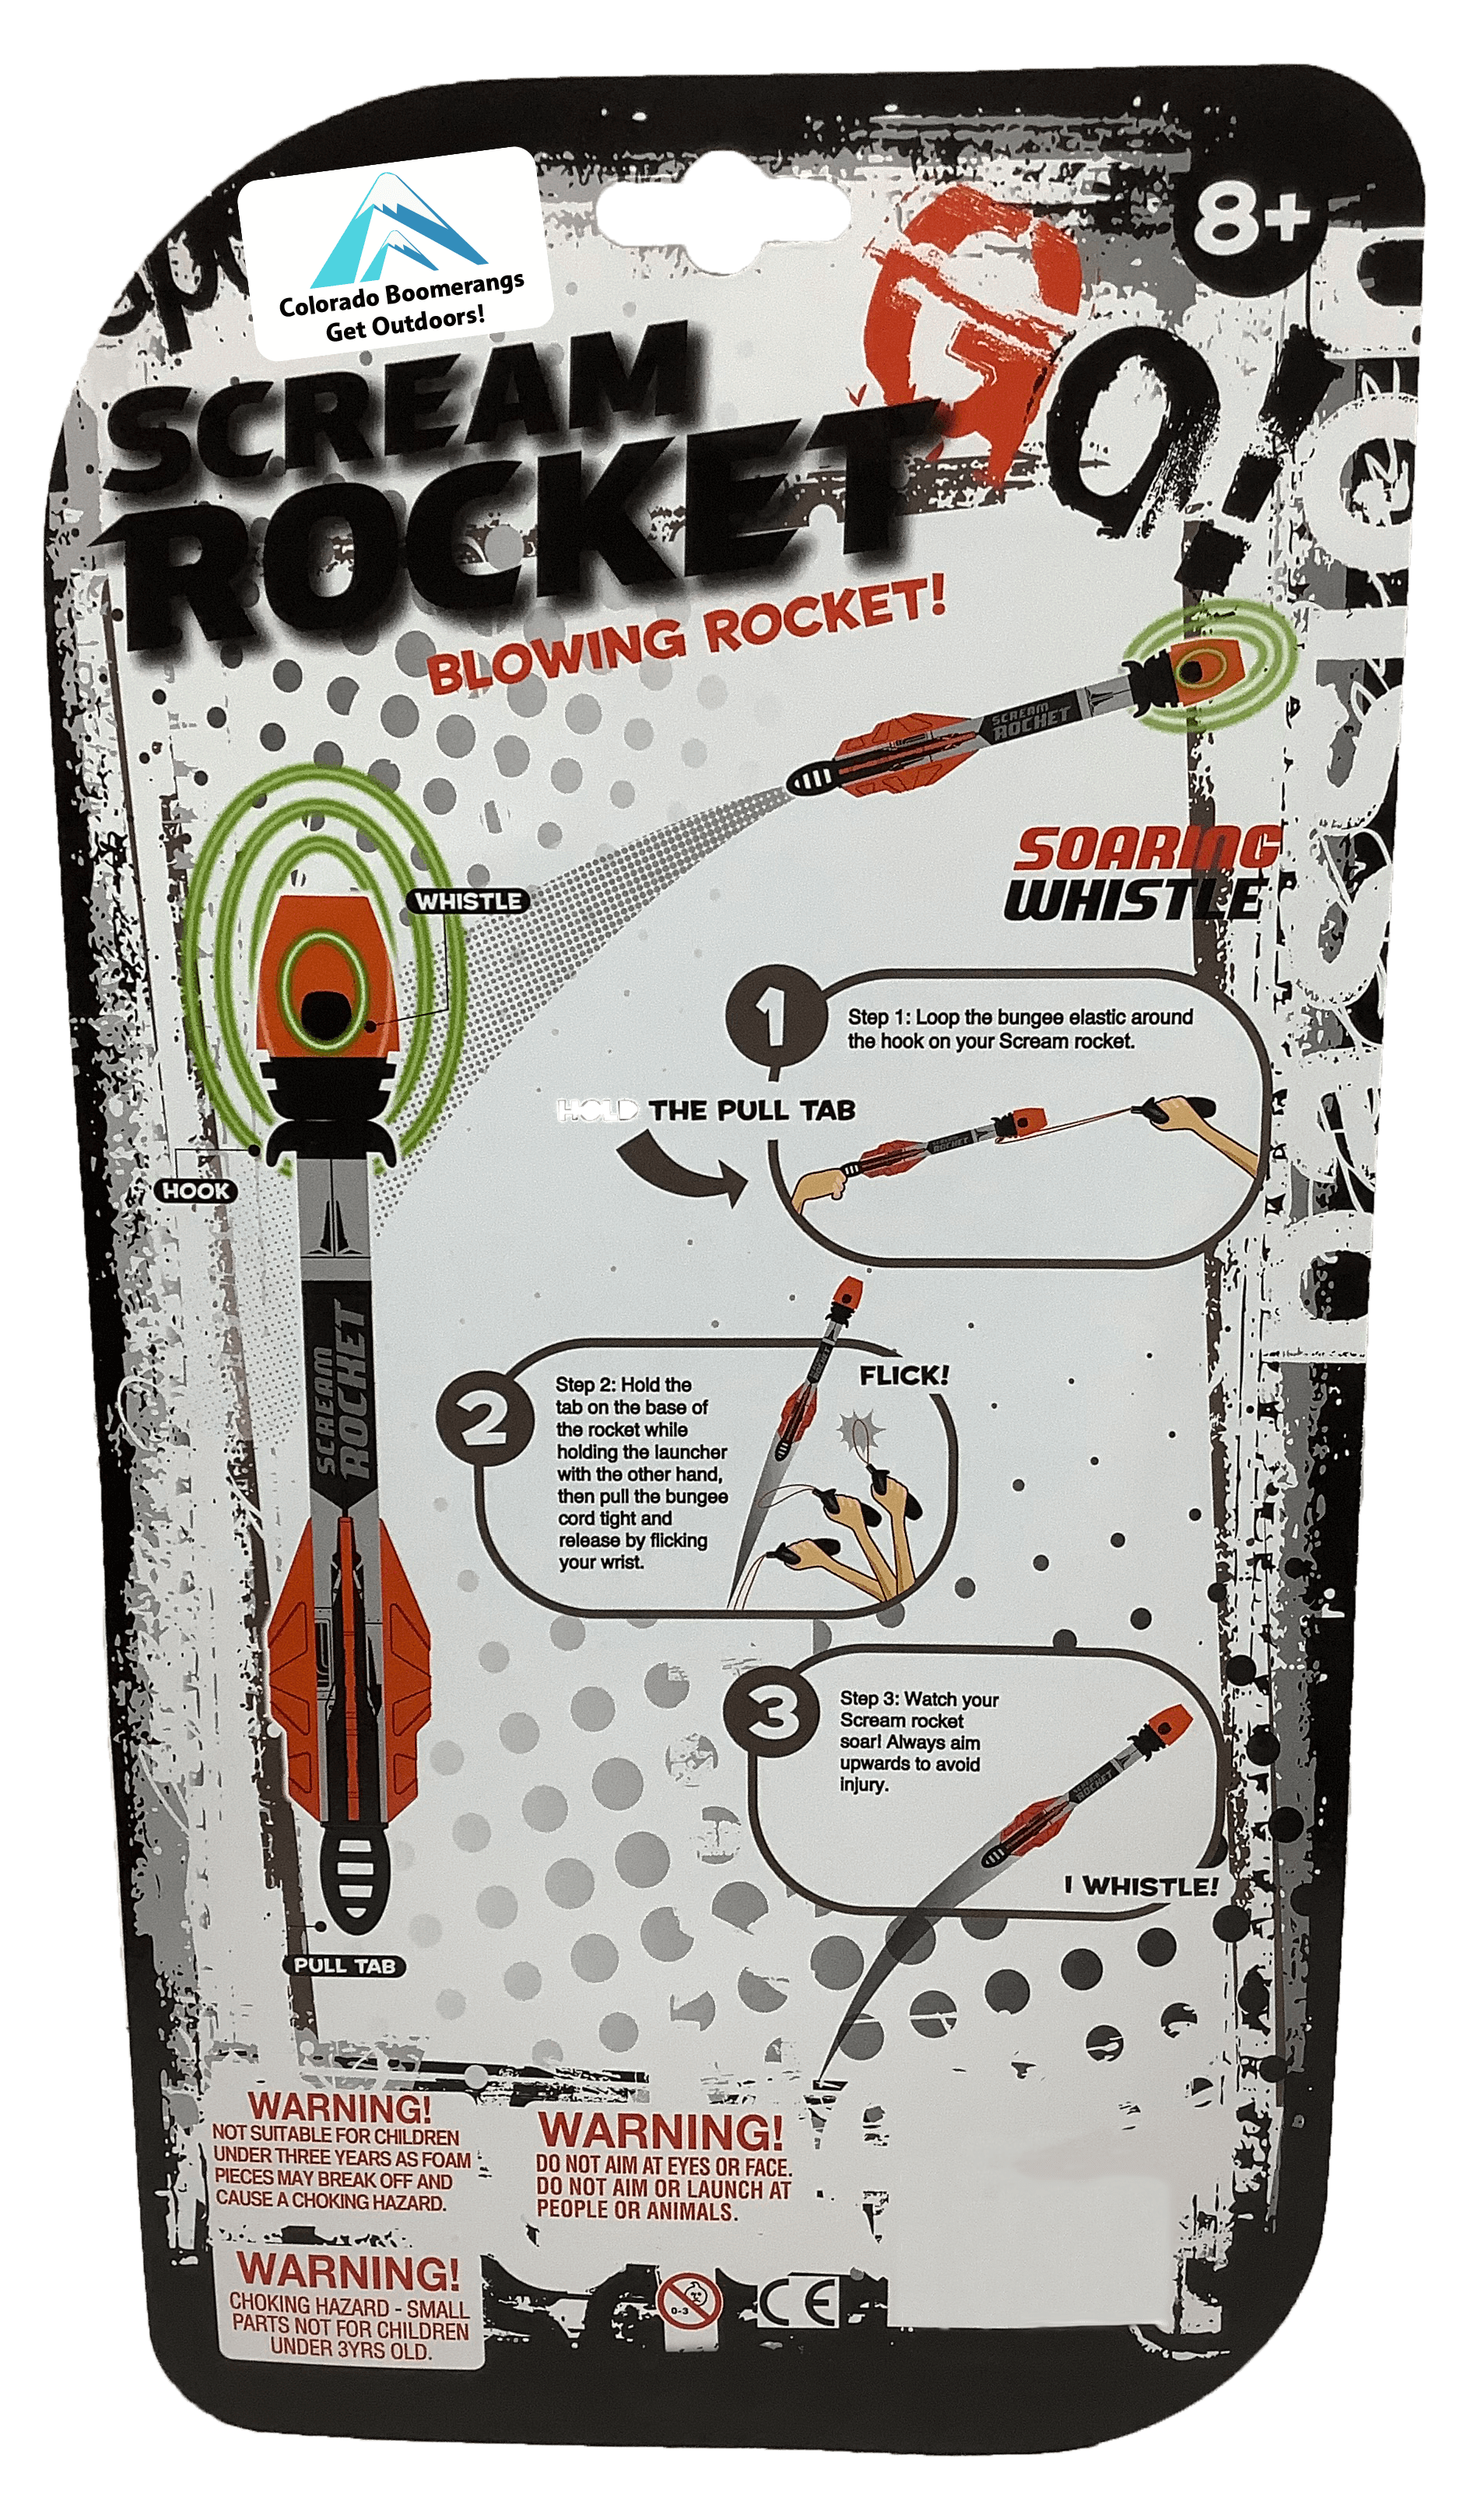 Scream Rockets - Hand Launched Rockets that Scream!